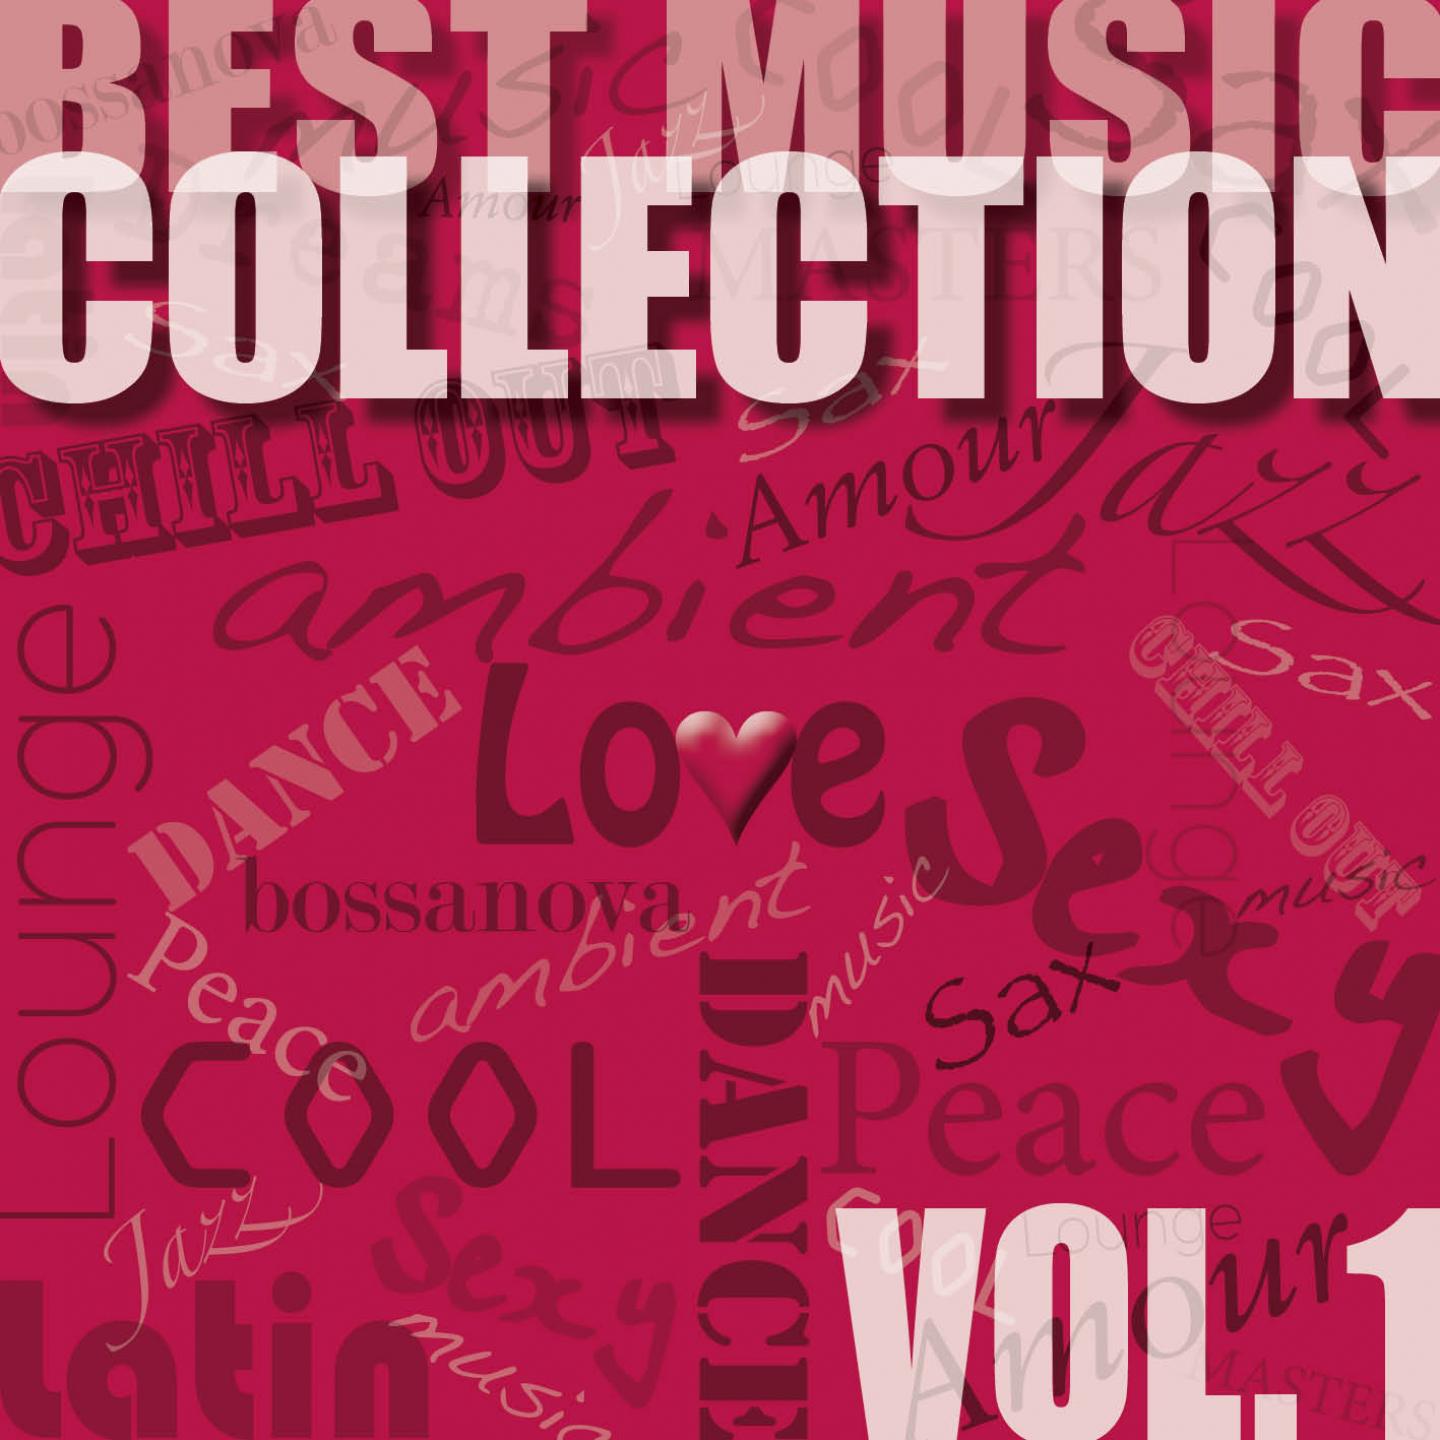 Best Music Collection, Vol. 1